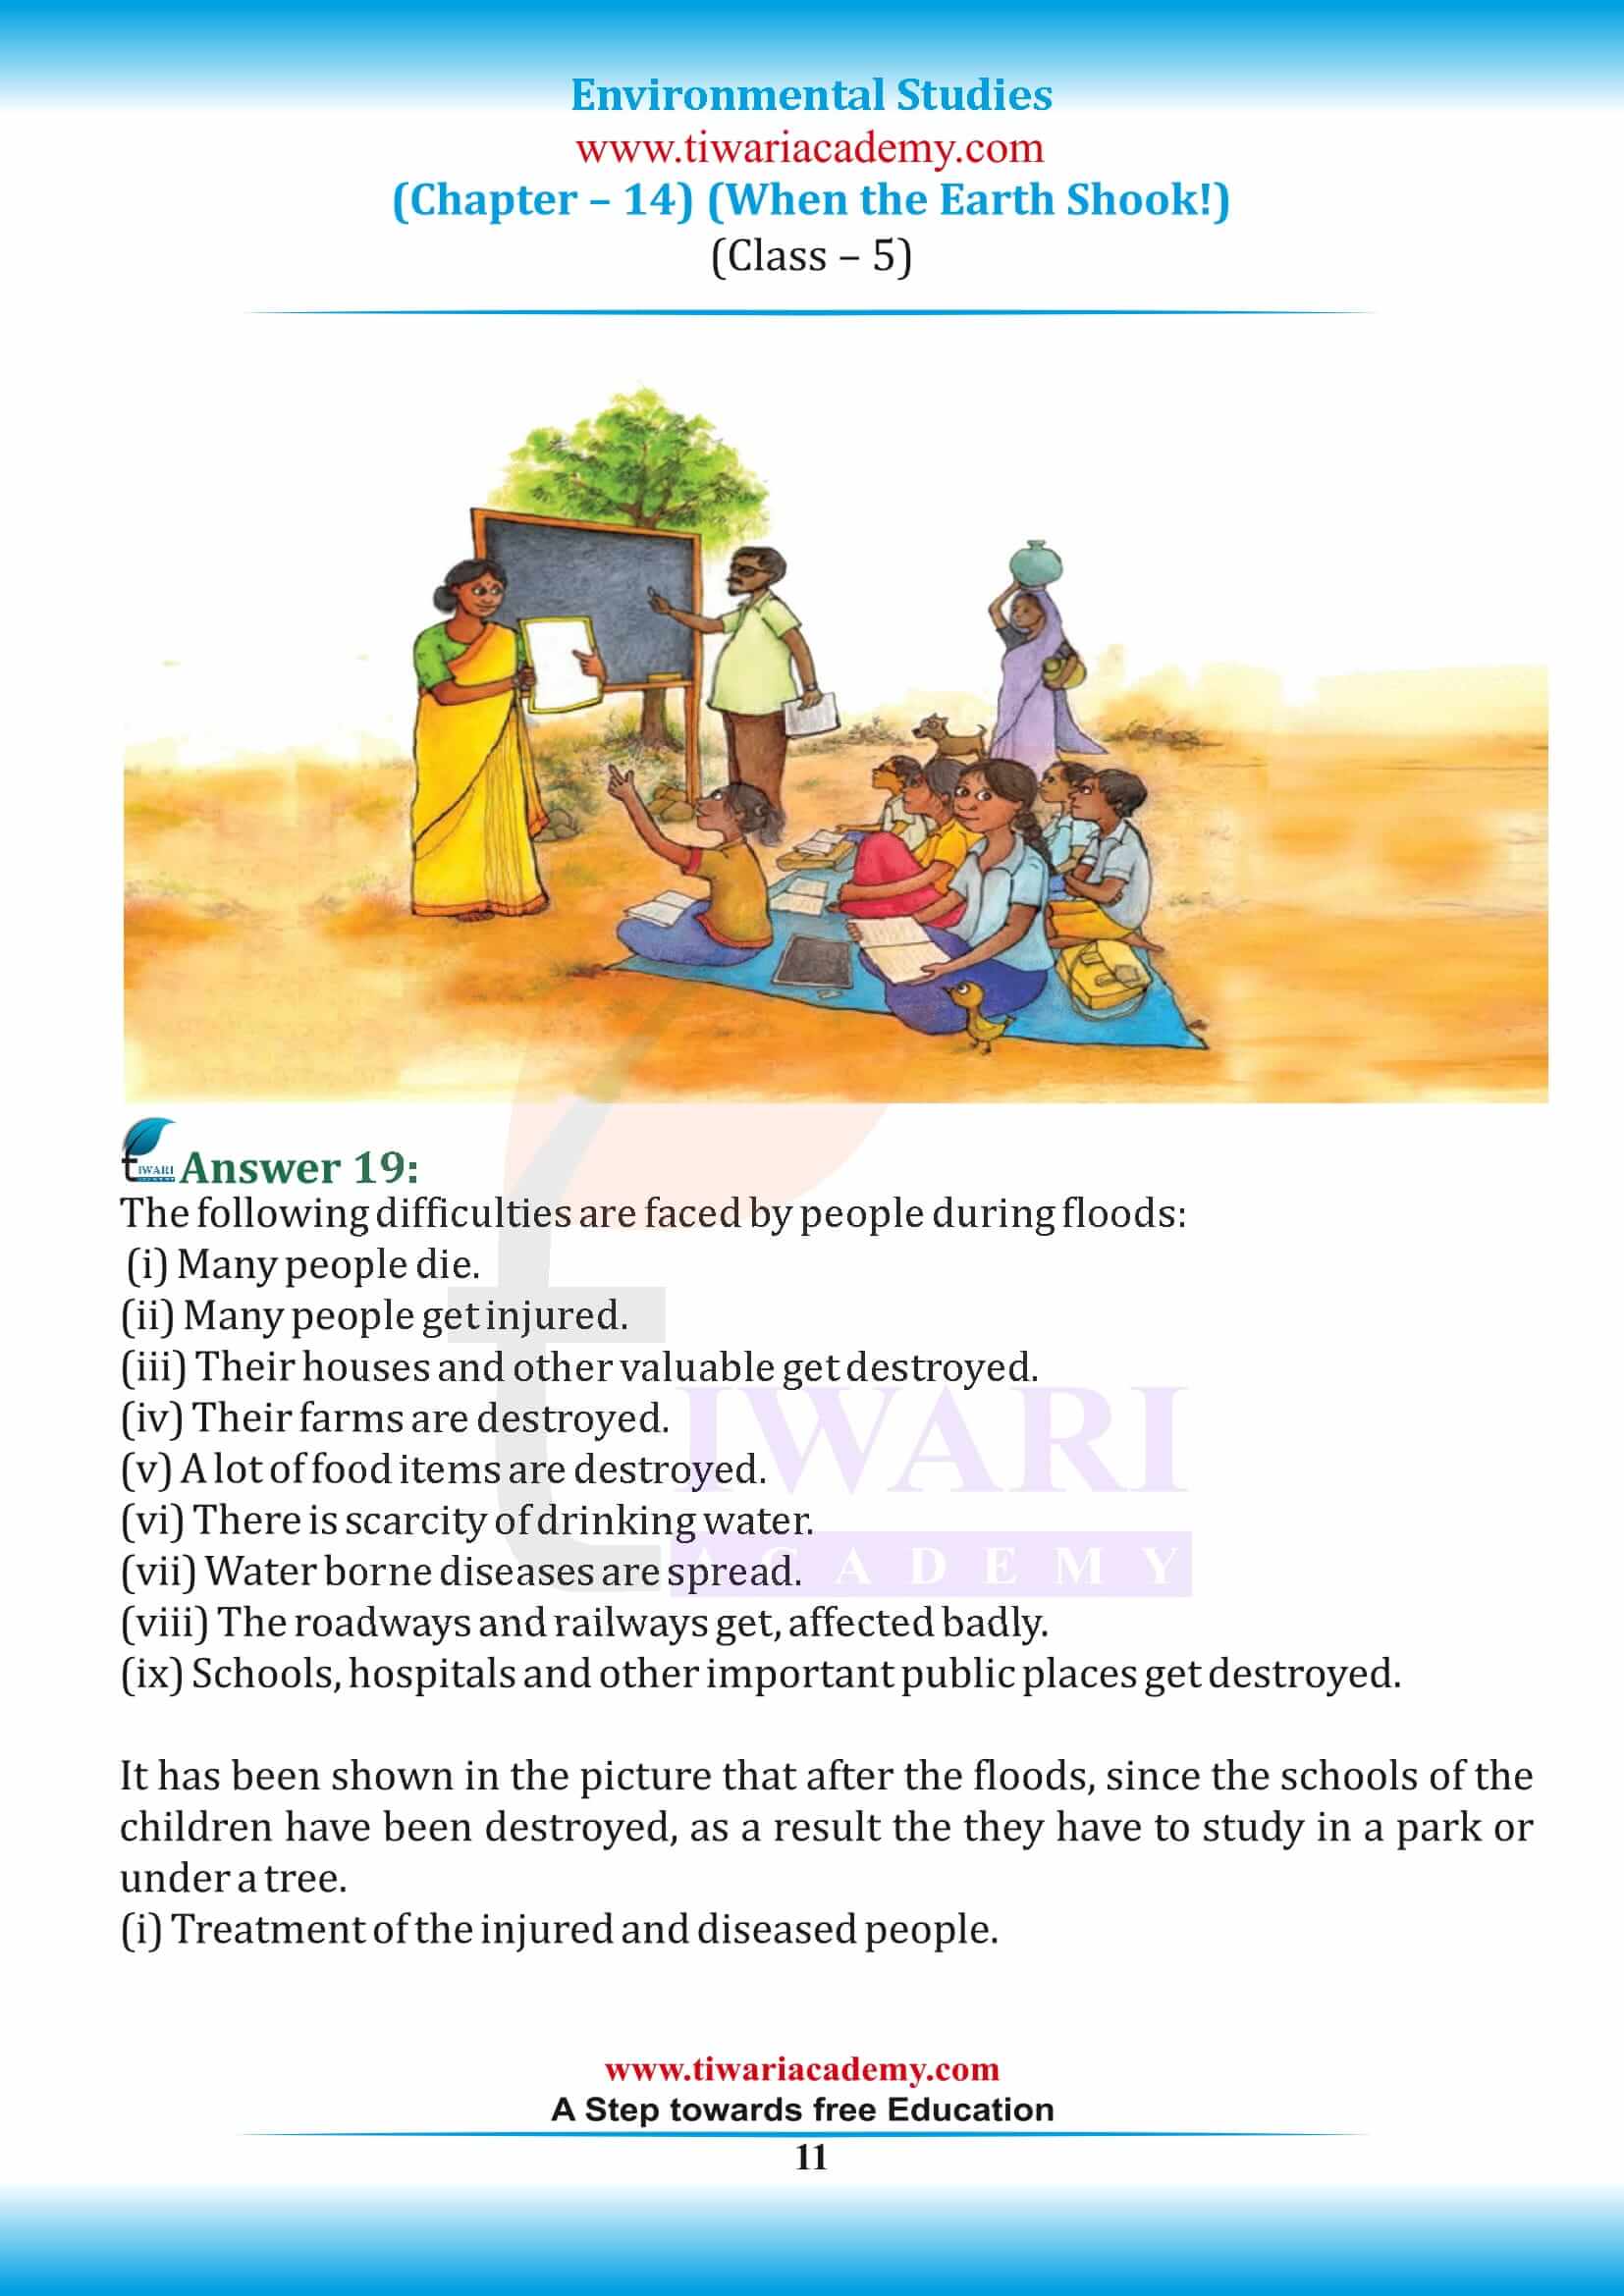 Class 5 EVS Chapter 14 all textbook answers